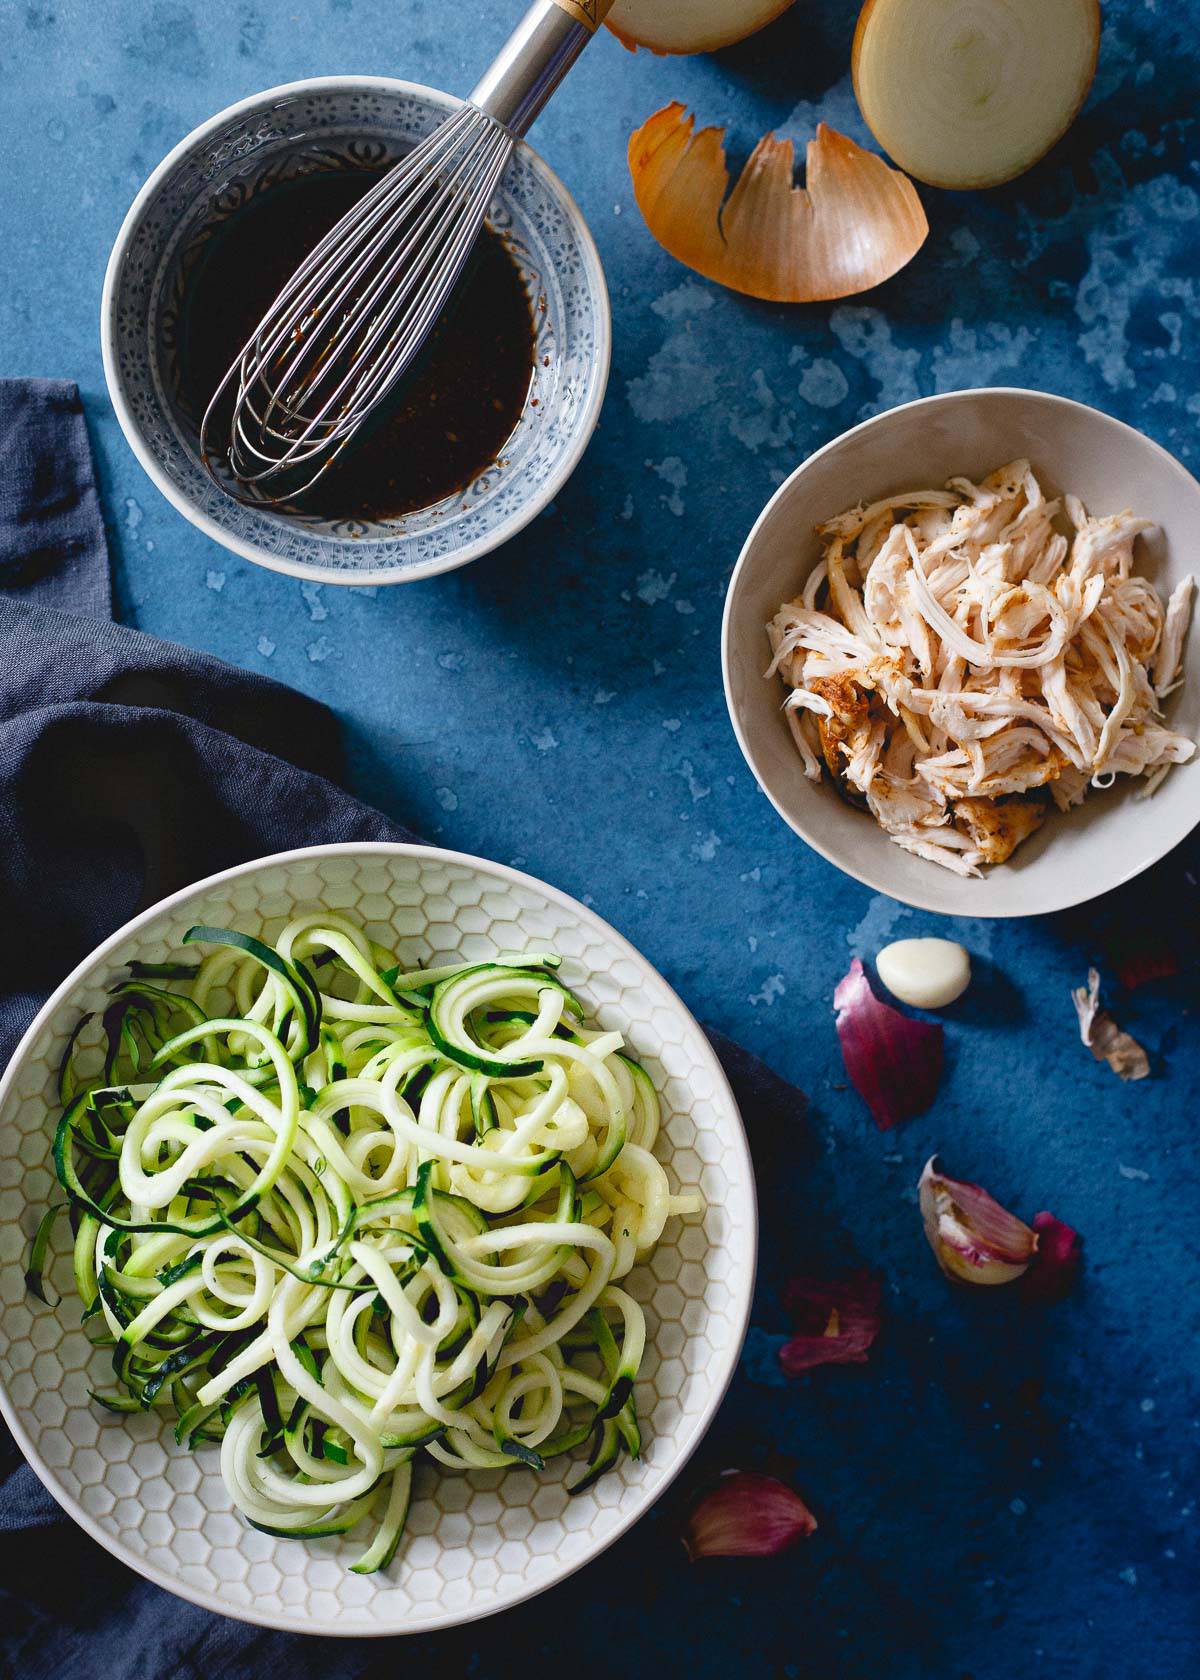 Zucchini noodles make this Chinese takeout inspired dinner a much healthier option.